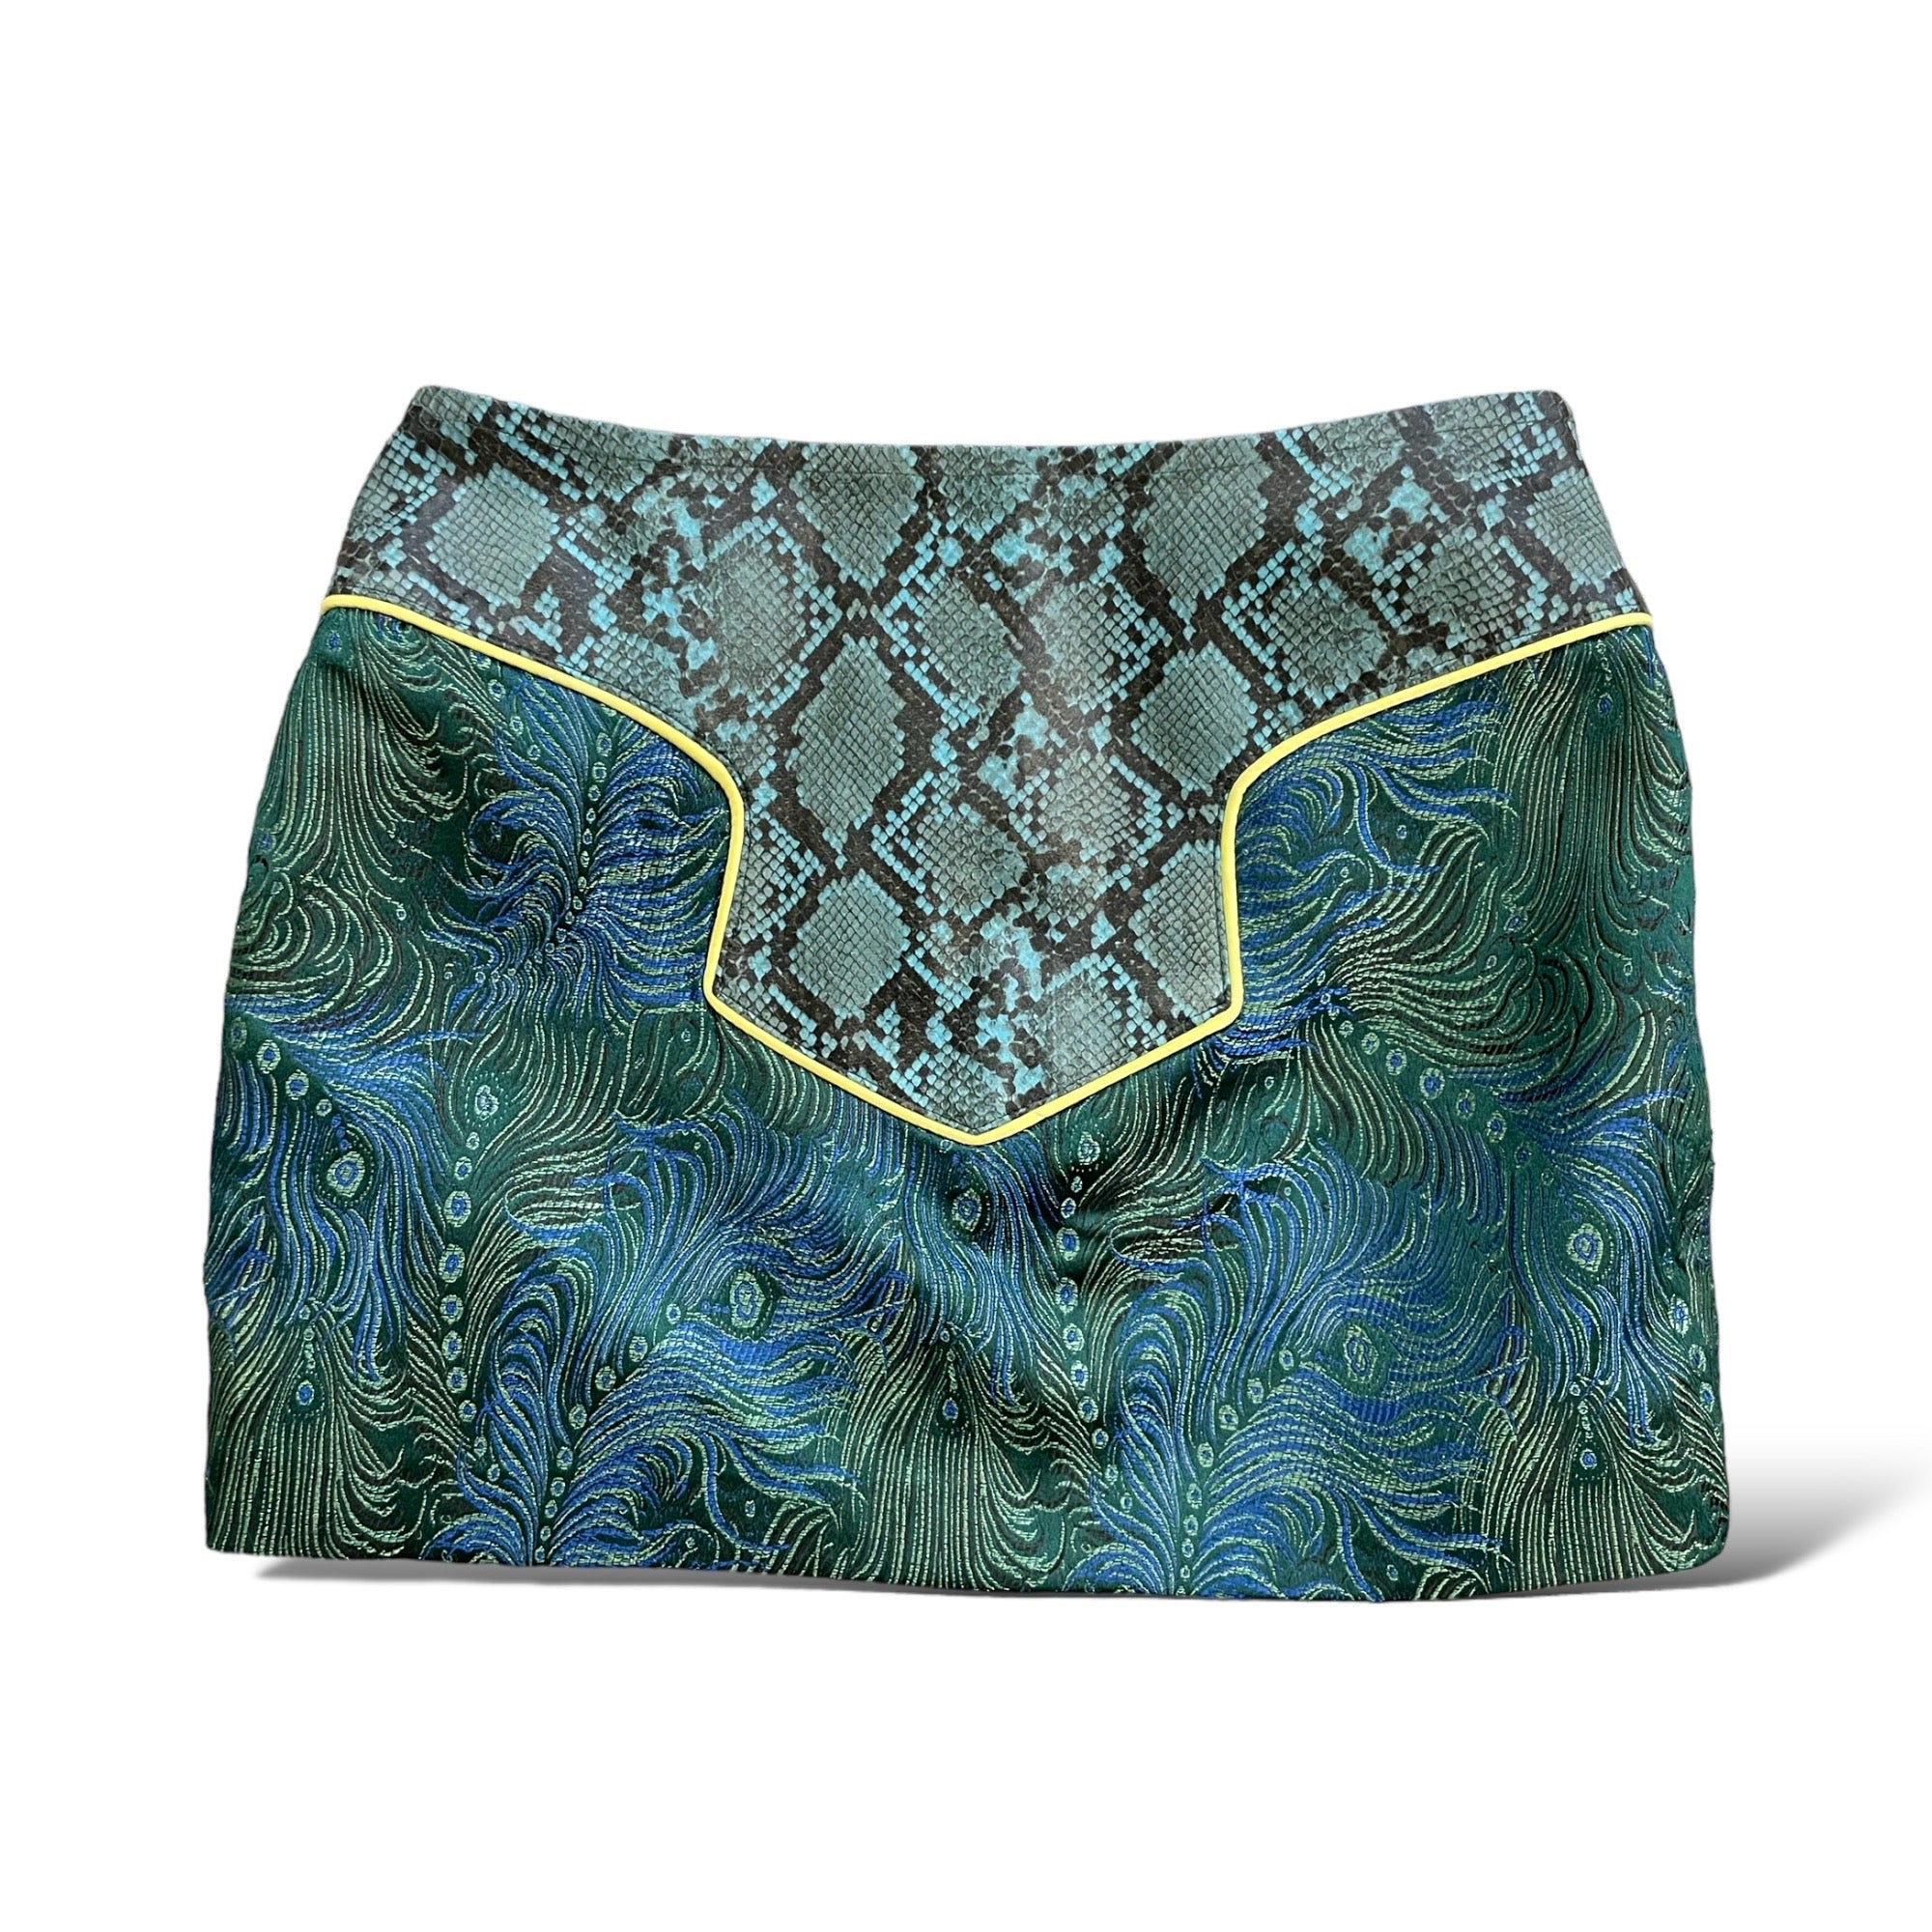 KIM SHUI Unique & BEAUTIFULLY Printed Mini Skirt Made in Italy
| Size: XS |